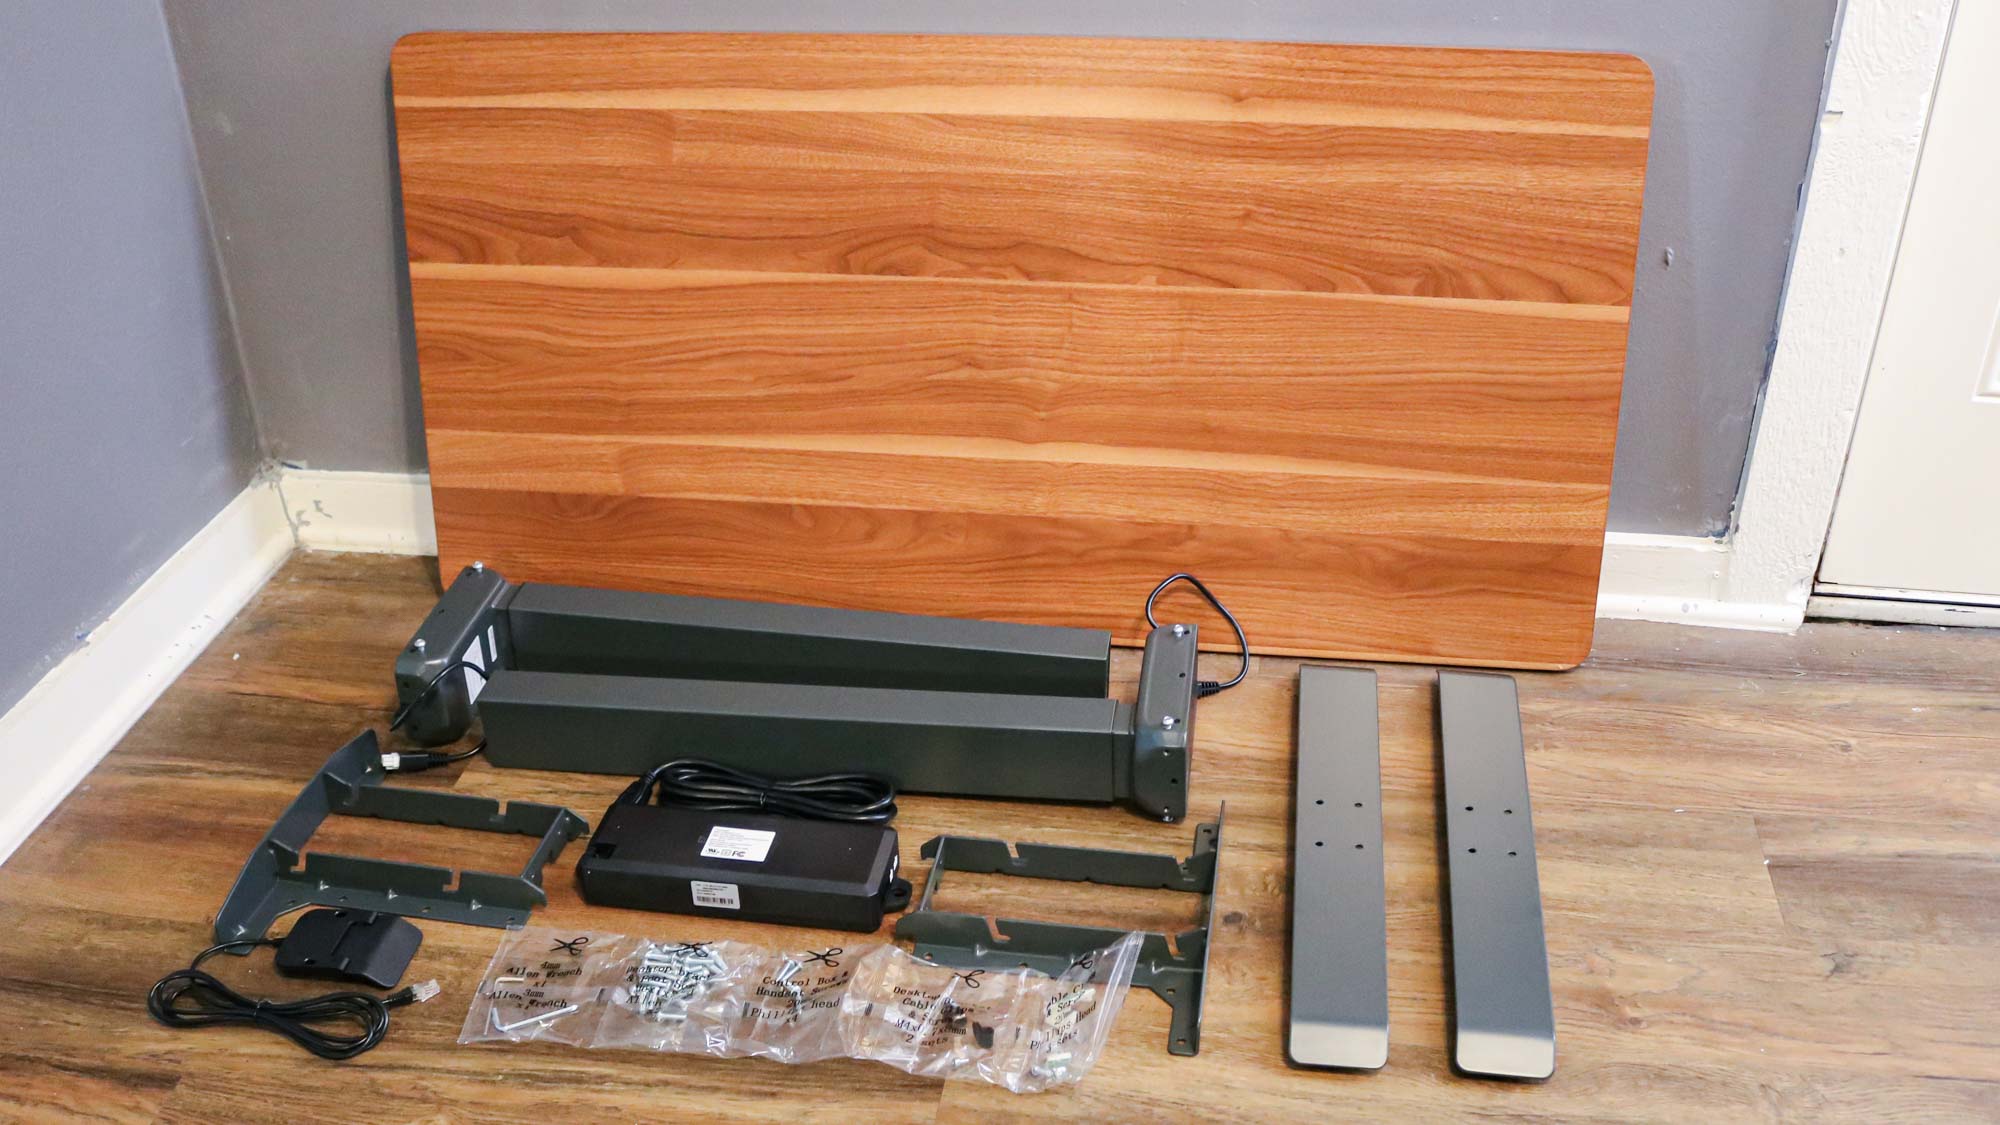 All of the pieces needed to build the Branch Duo Standing Desk laid out on the floor